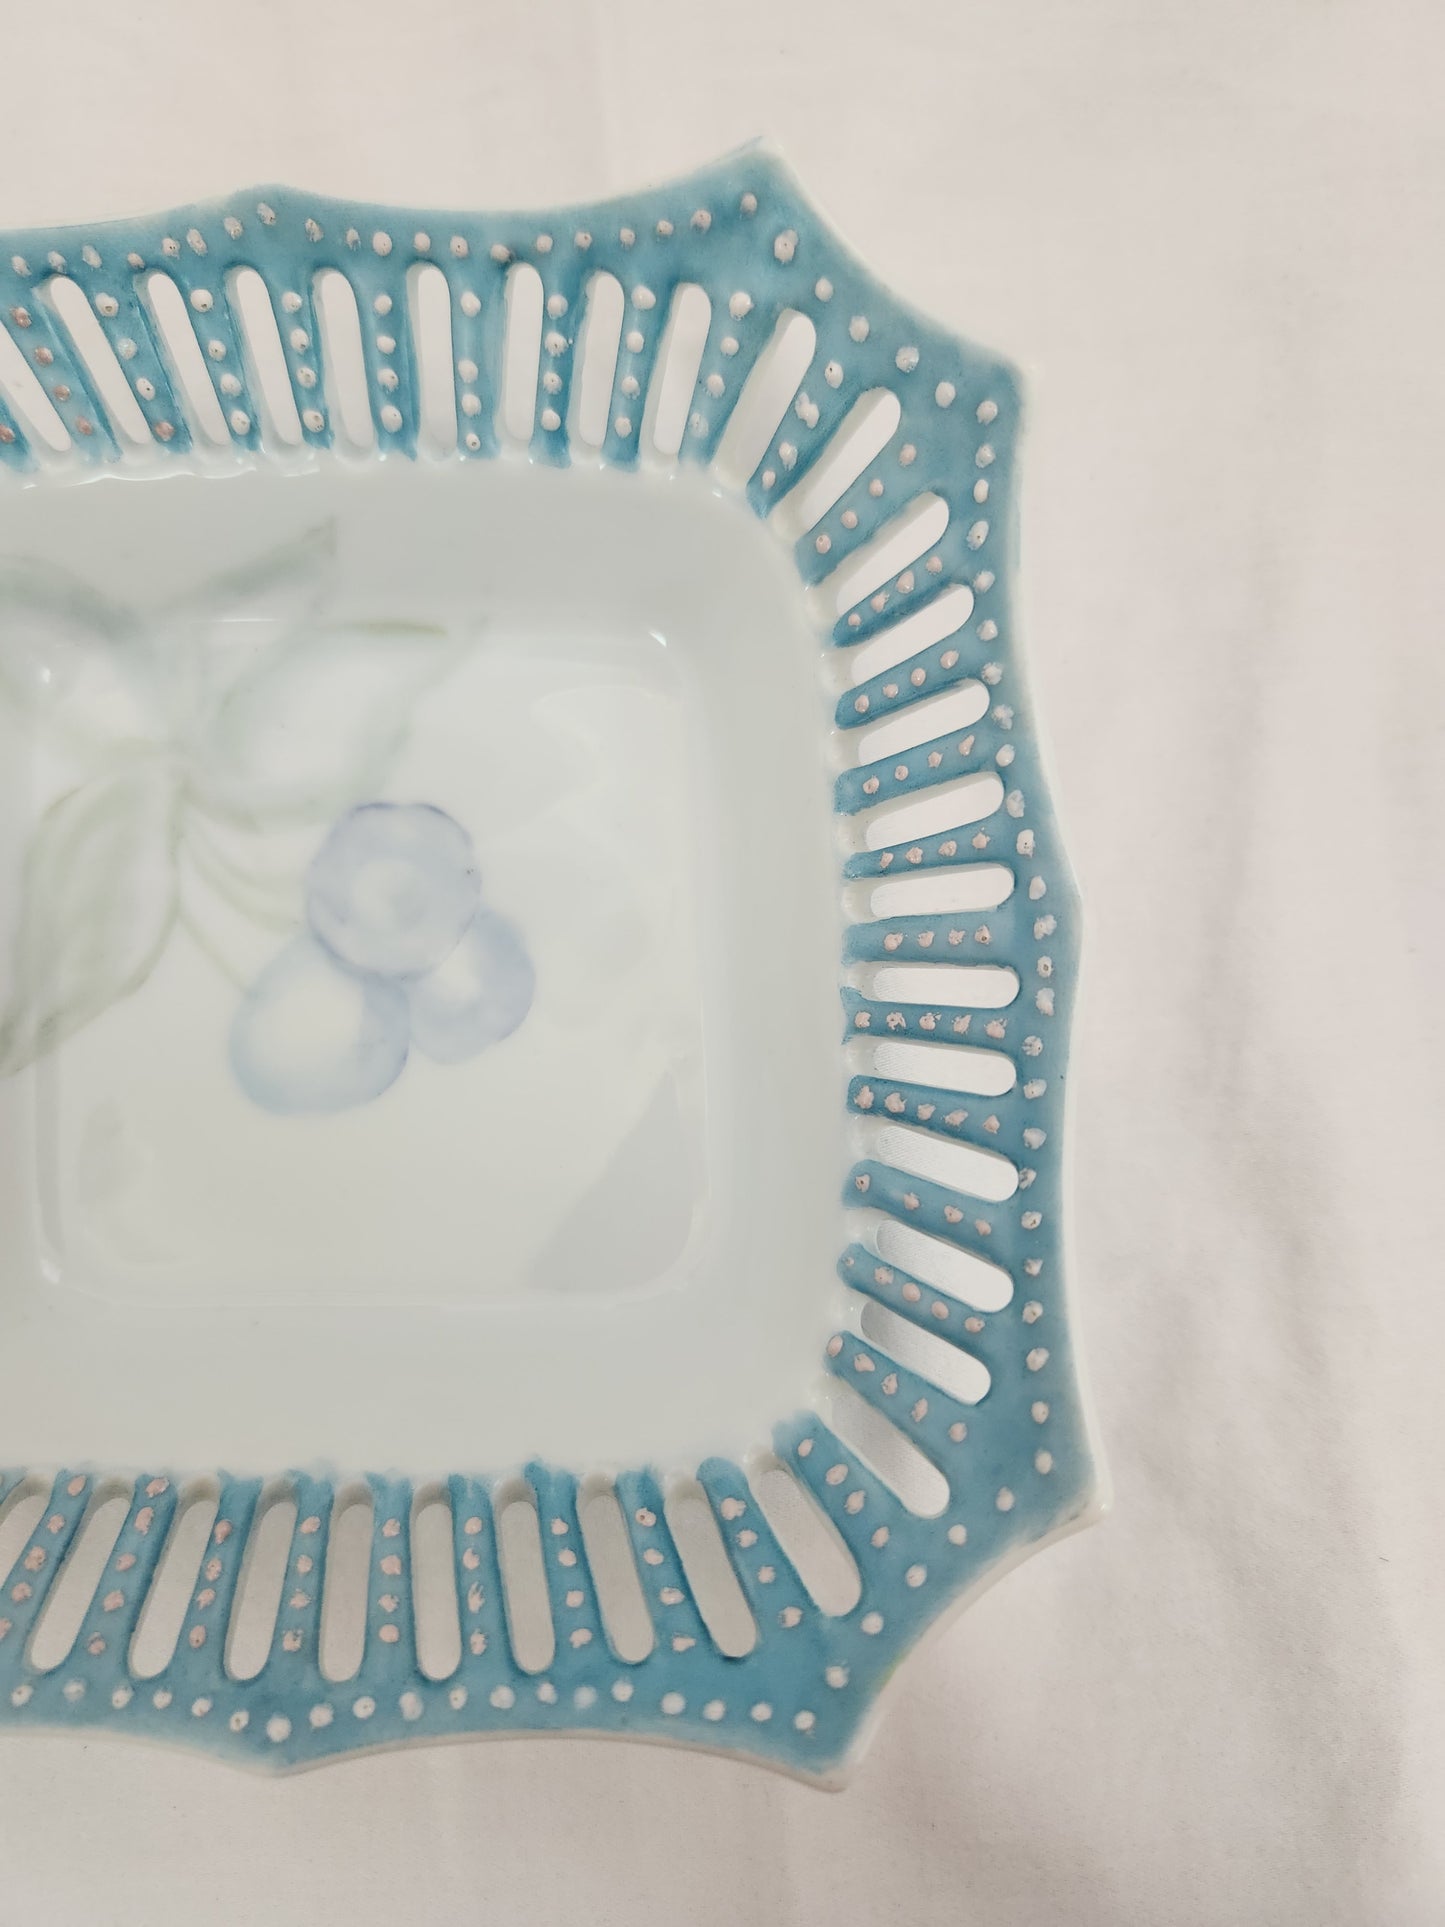 Square Reticulated Light Blue 5-1/2" Trinket/Candy Dish (signed)